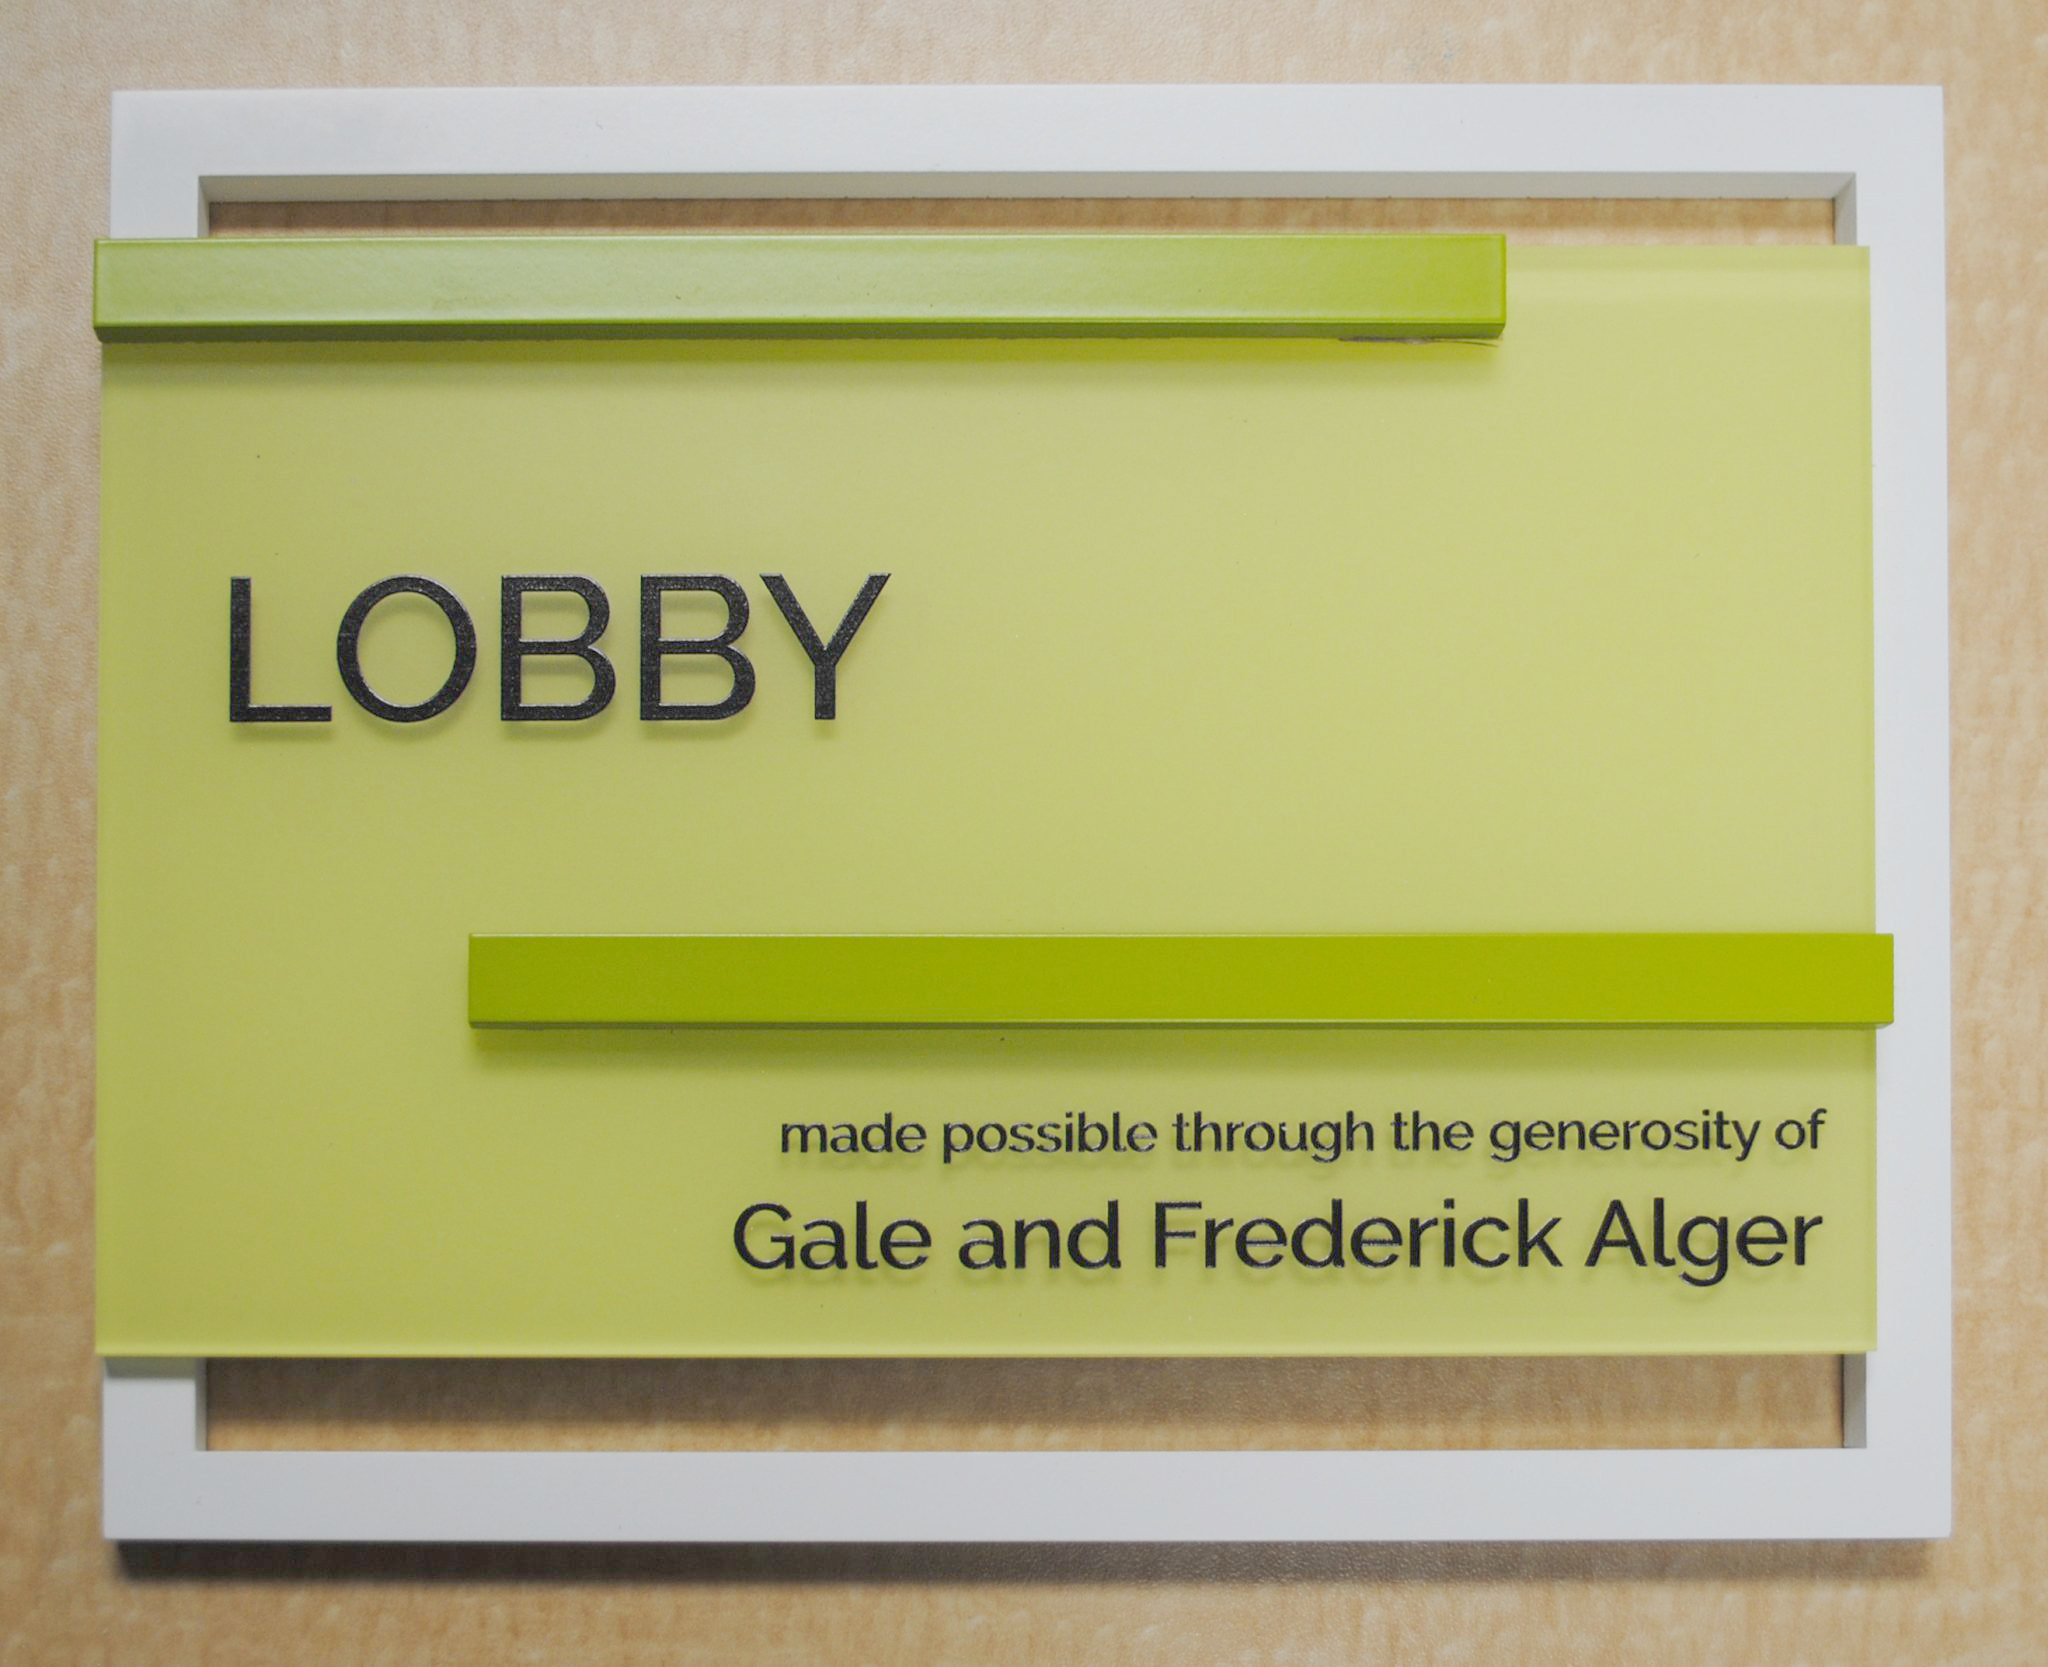 Named Room, Capital Campaign, Donor Recognition